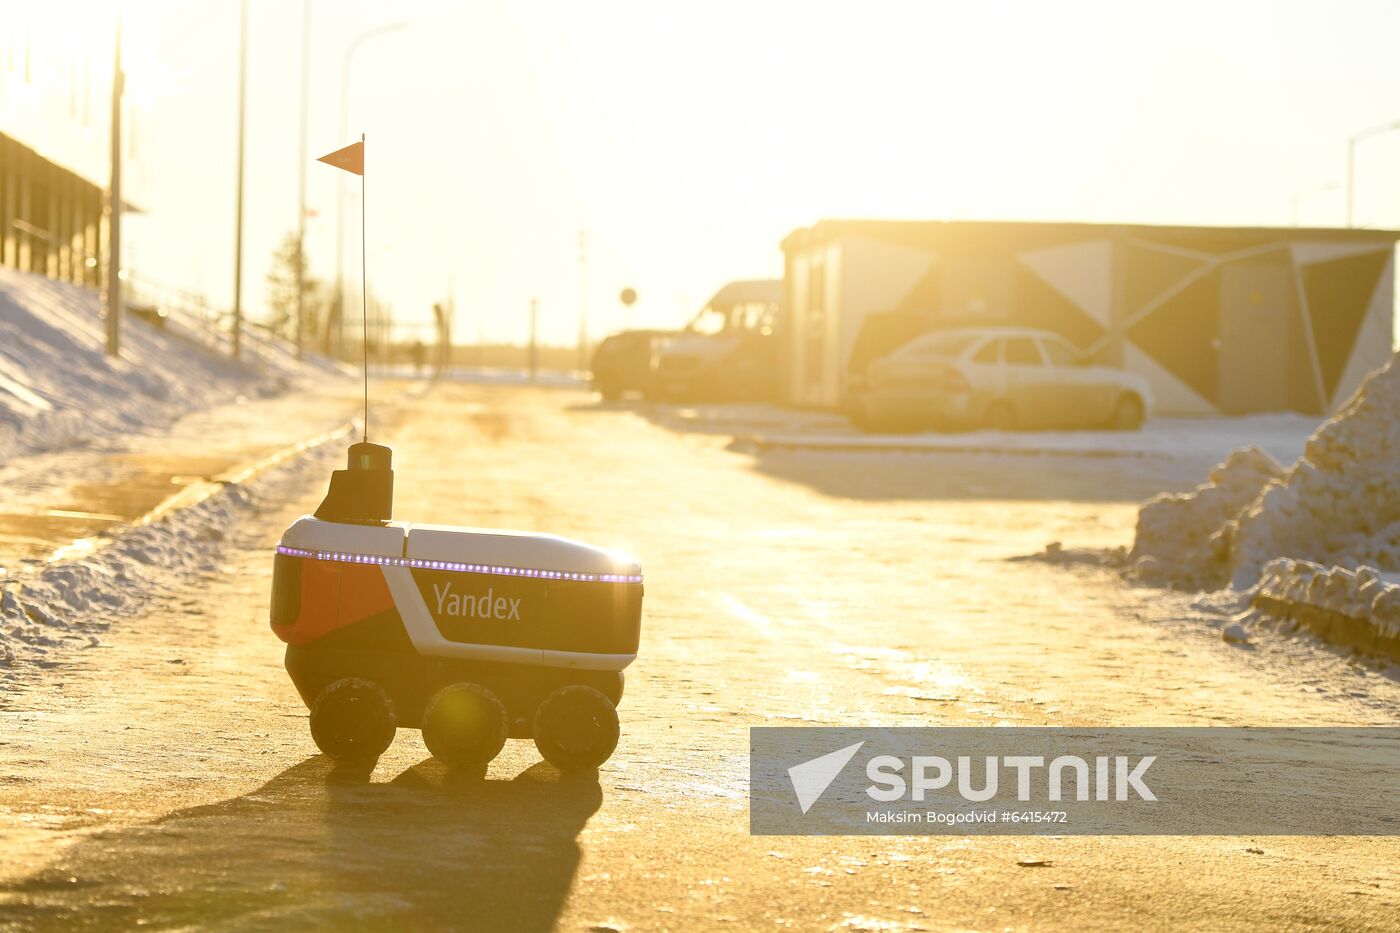 Russia Delivery Robot